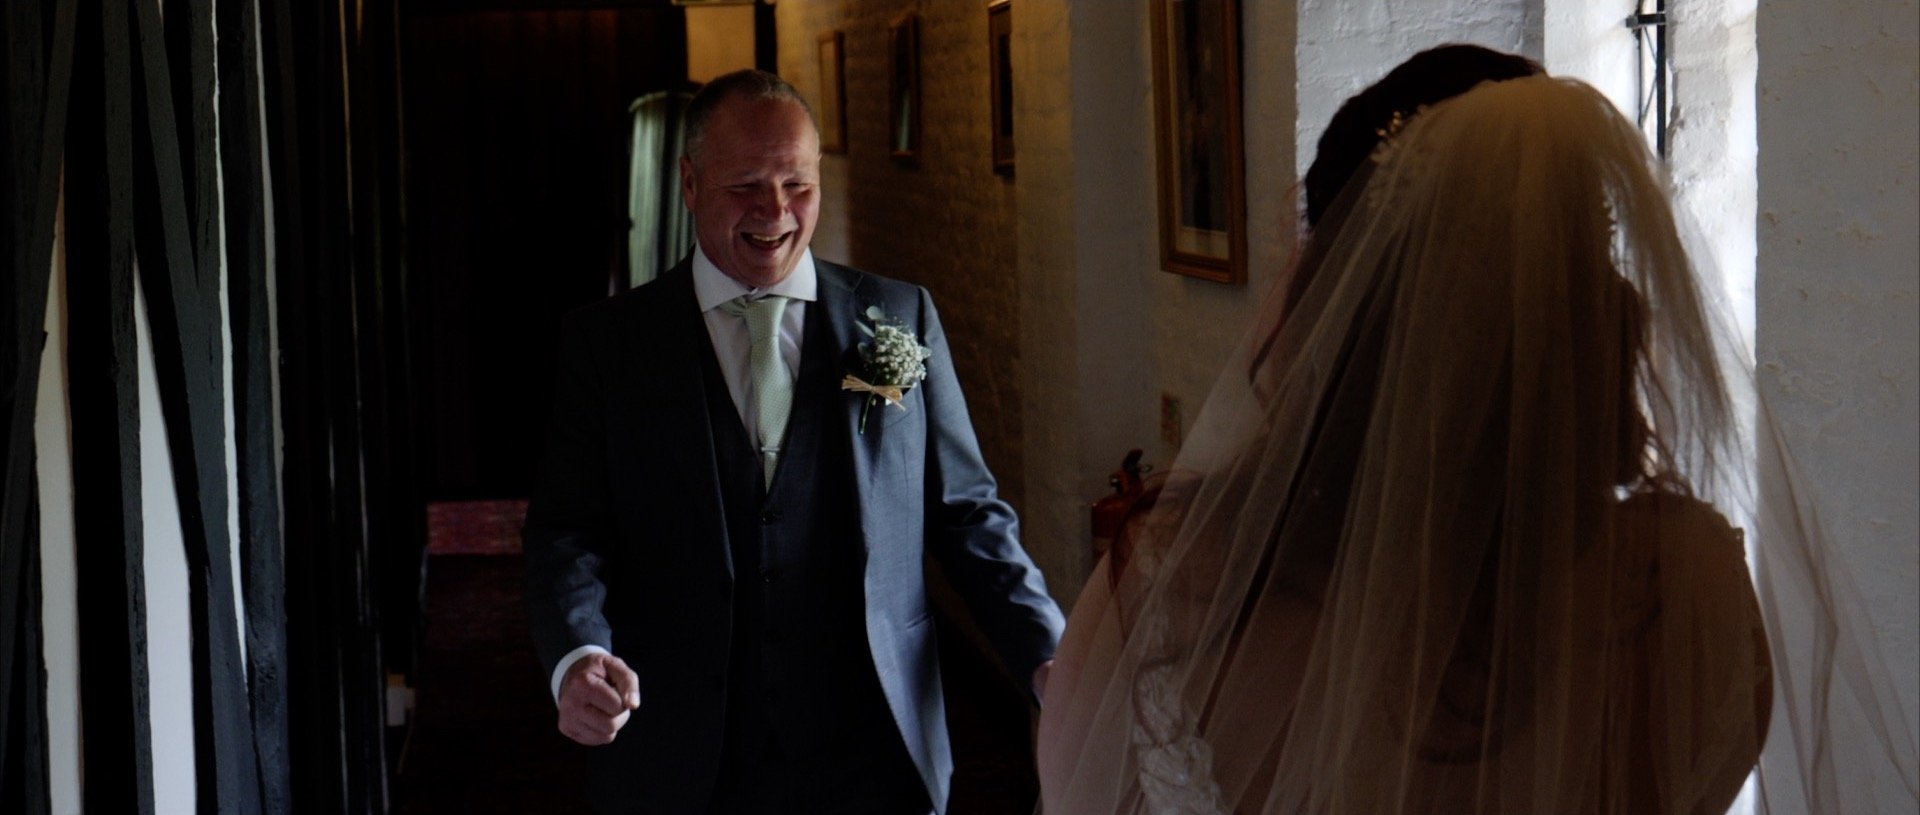 Fathers reaction to bride reveal Essex wedding videos.jpg